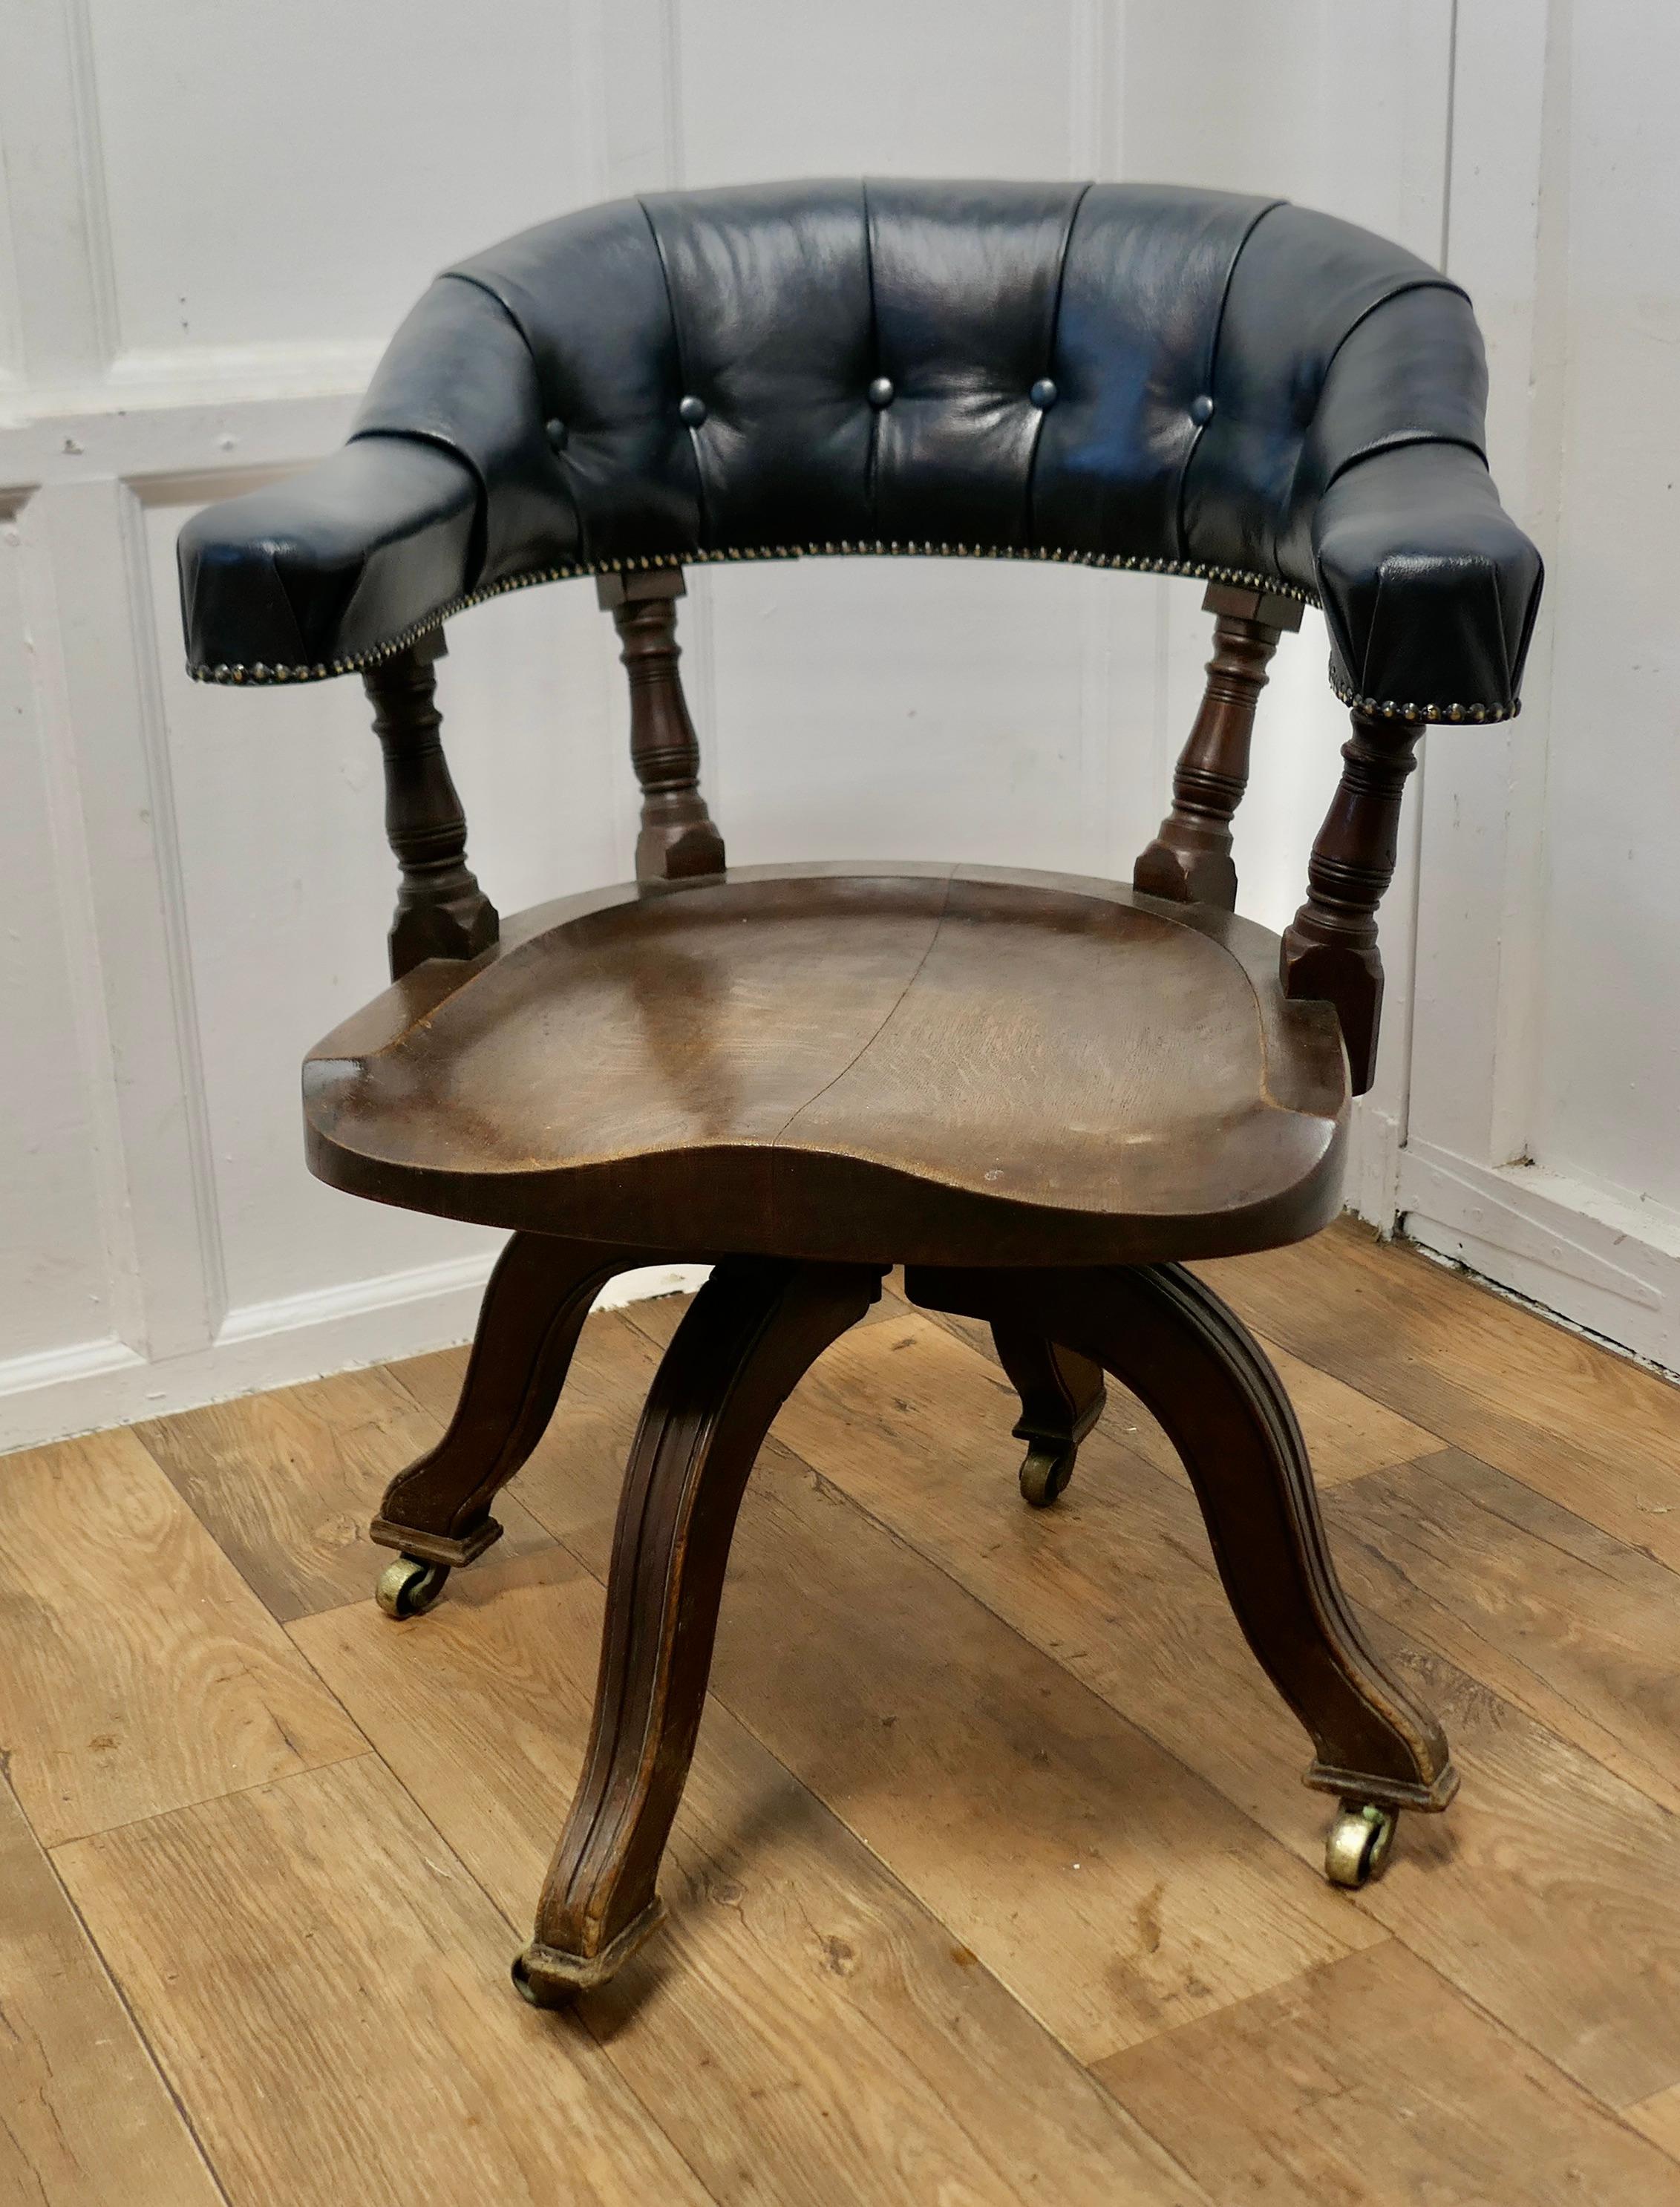 A 19th Century Swivelling Oak Office or Desk Chair 

The Chair has an attractive deep curving back top rail which is has deeply buttoned dark blue leather upholstery giving great comfort for the back and arms, the chair also has a beautifully shaped